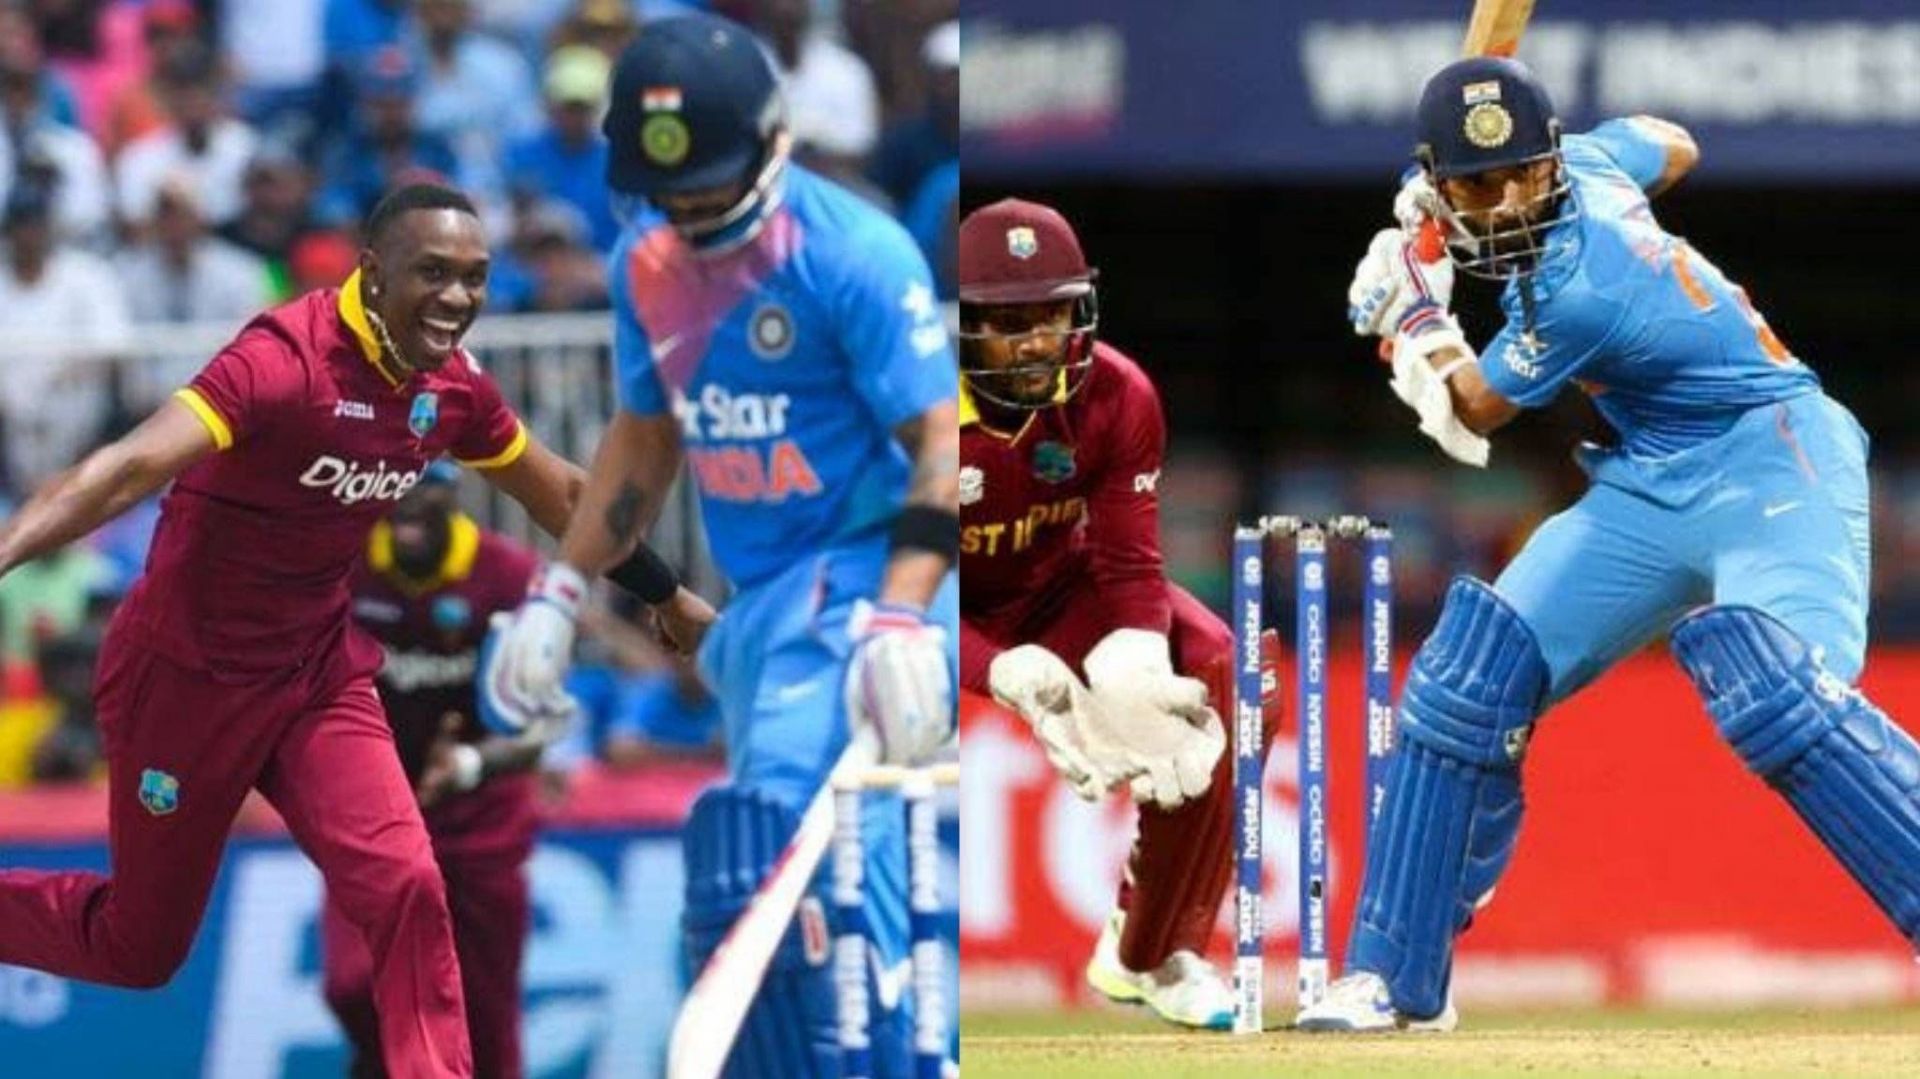 India last lost a T20I series against West Indies in 2016